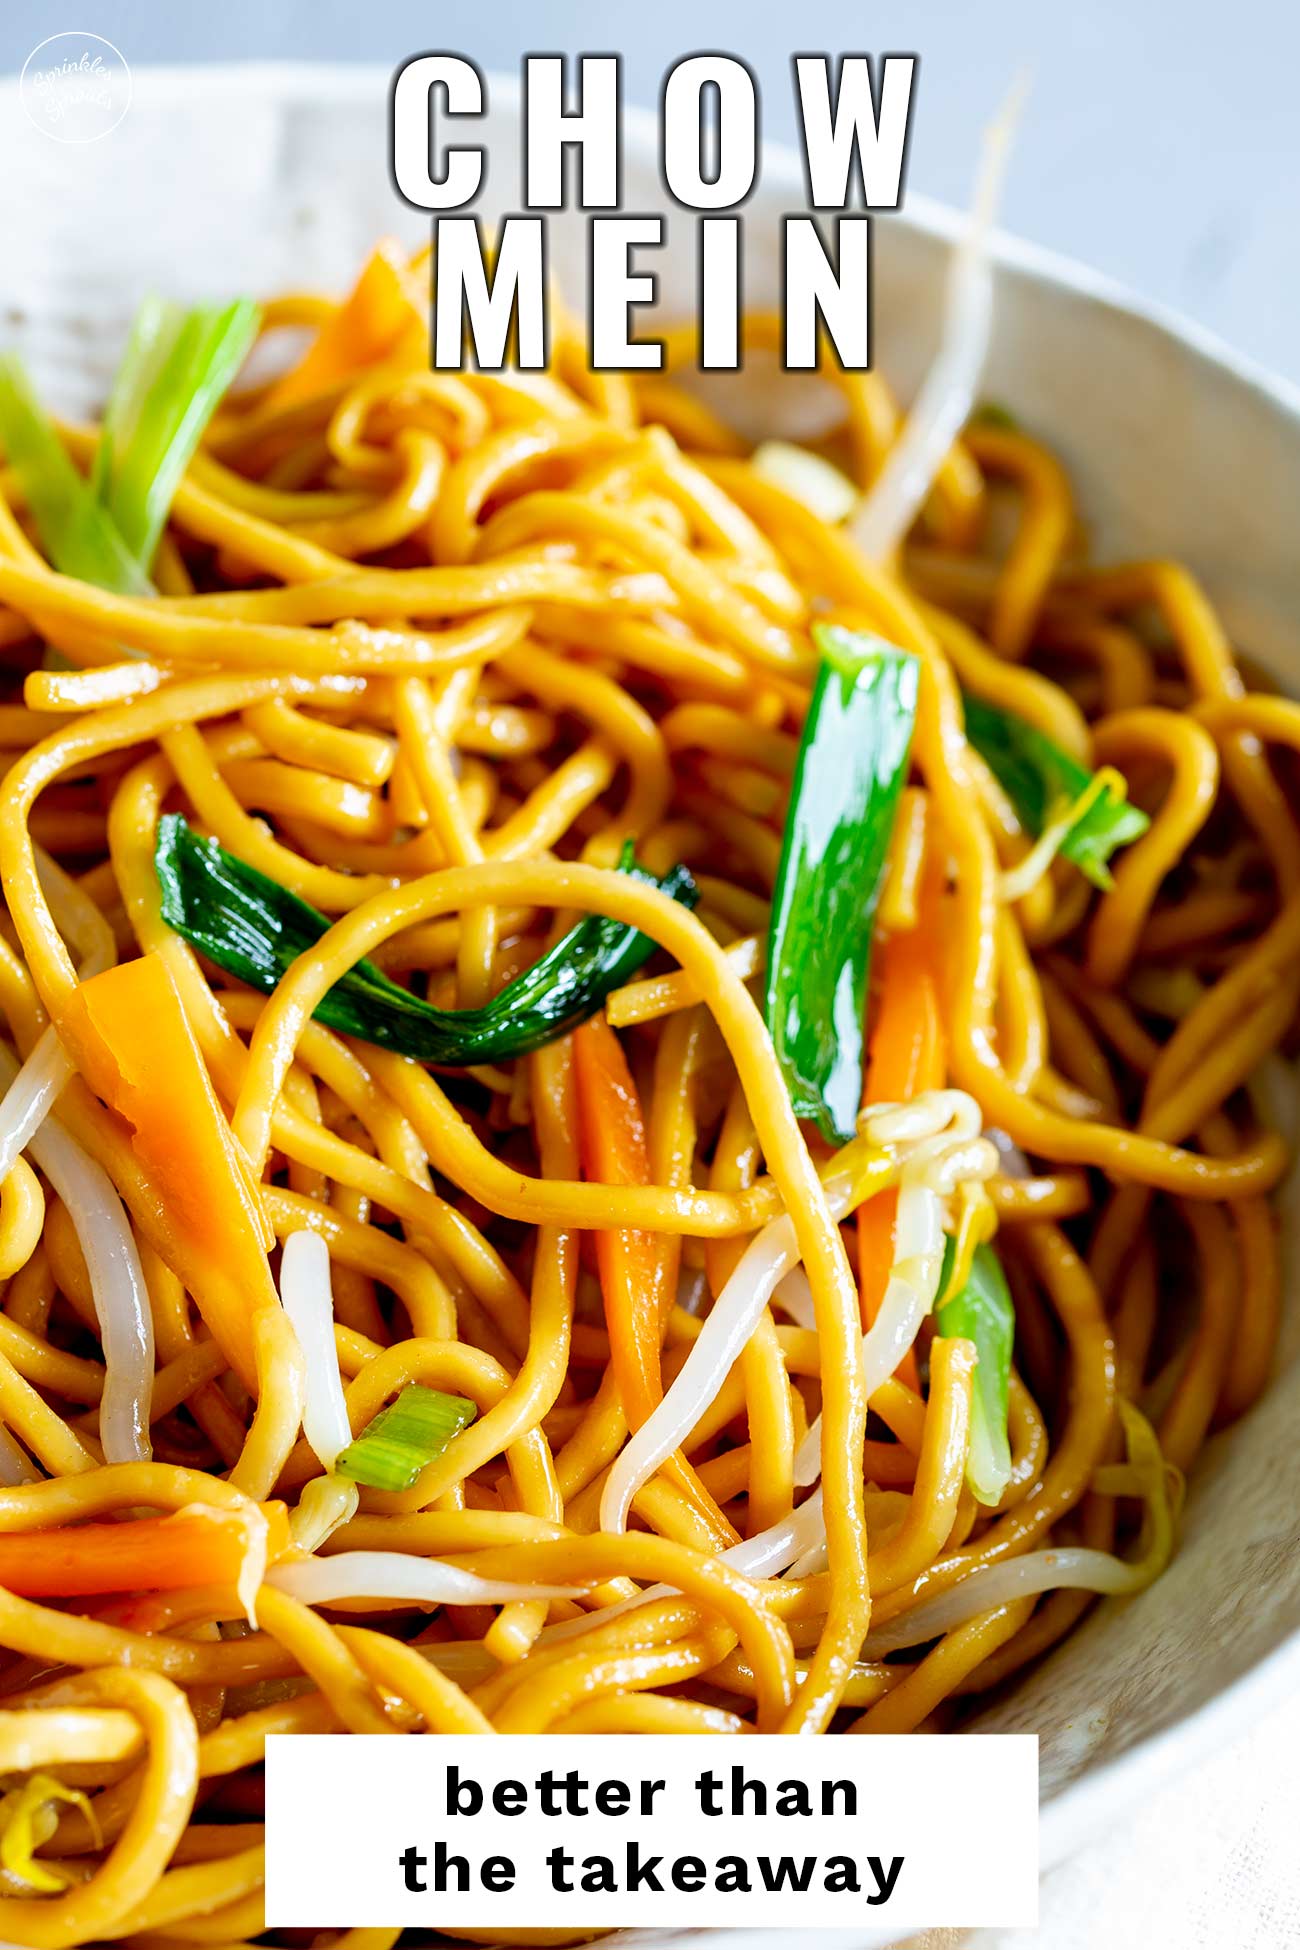 PINTEREST IMAGE: Chow Mein with text overlay